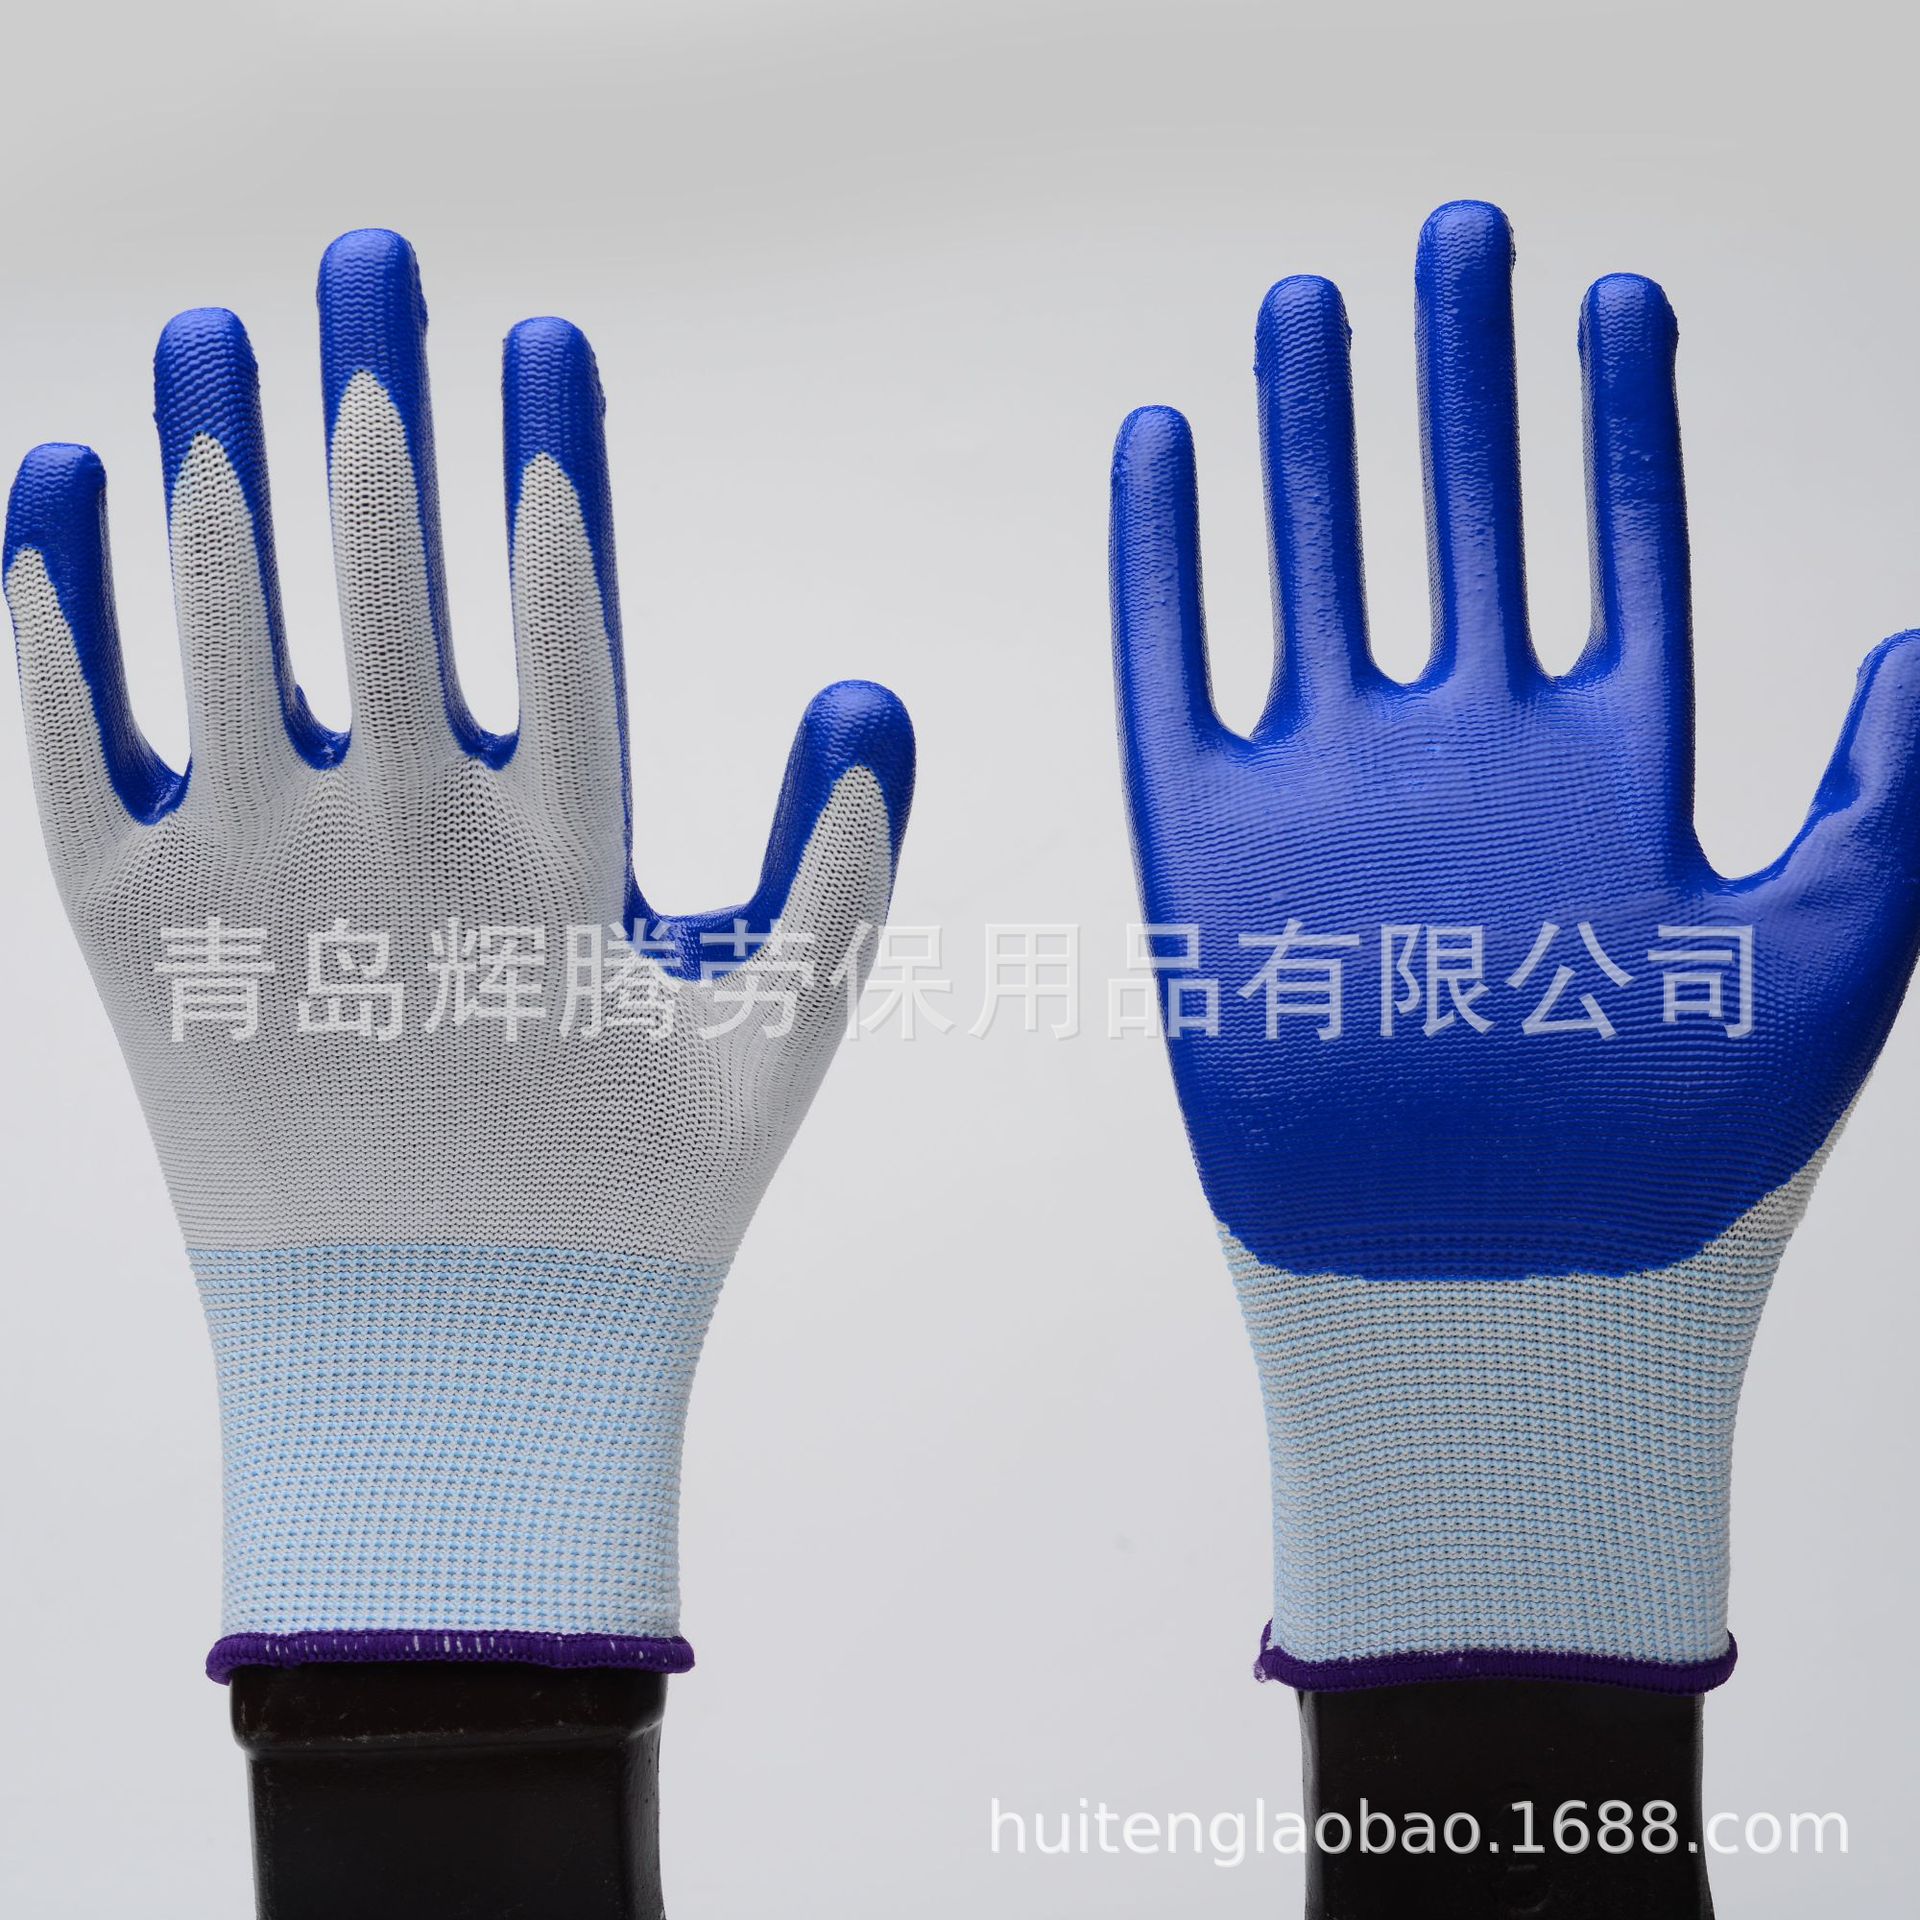 Breathable Protective Gloves for Labor Protection 13-Pin Nitrile Rubber Pvc Latex Dipped Gloves Nylon Protective Gloves